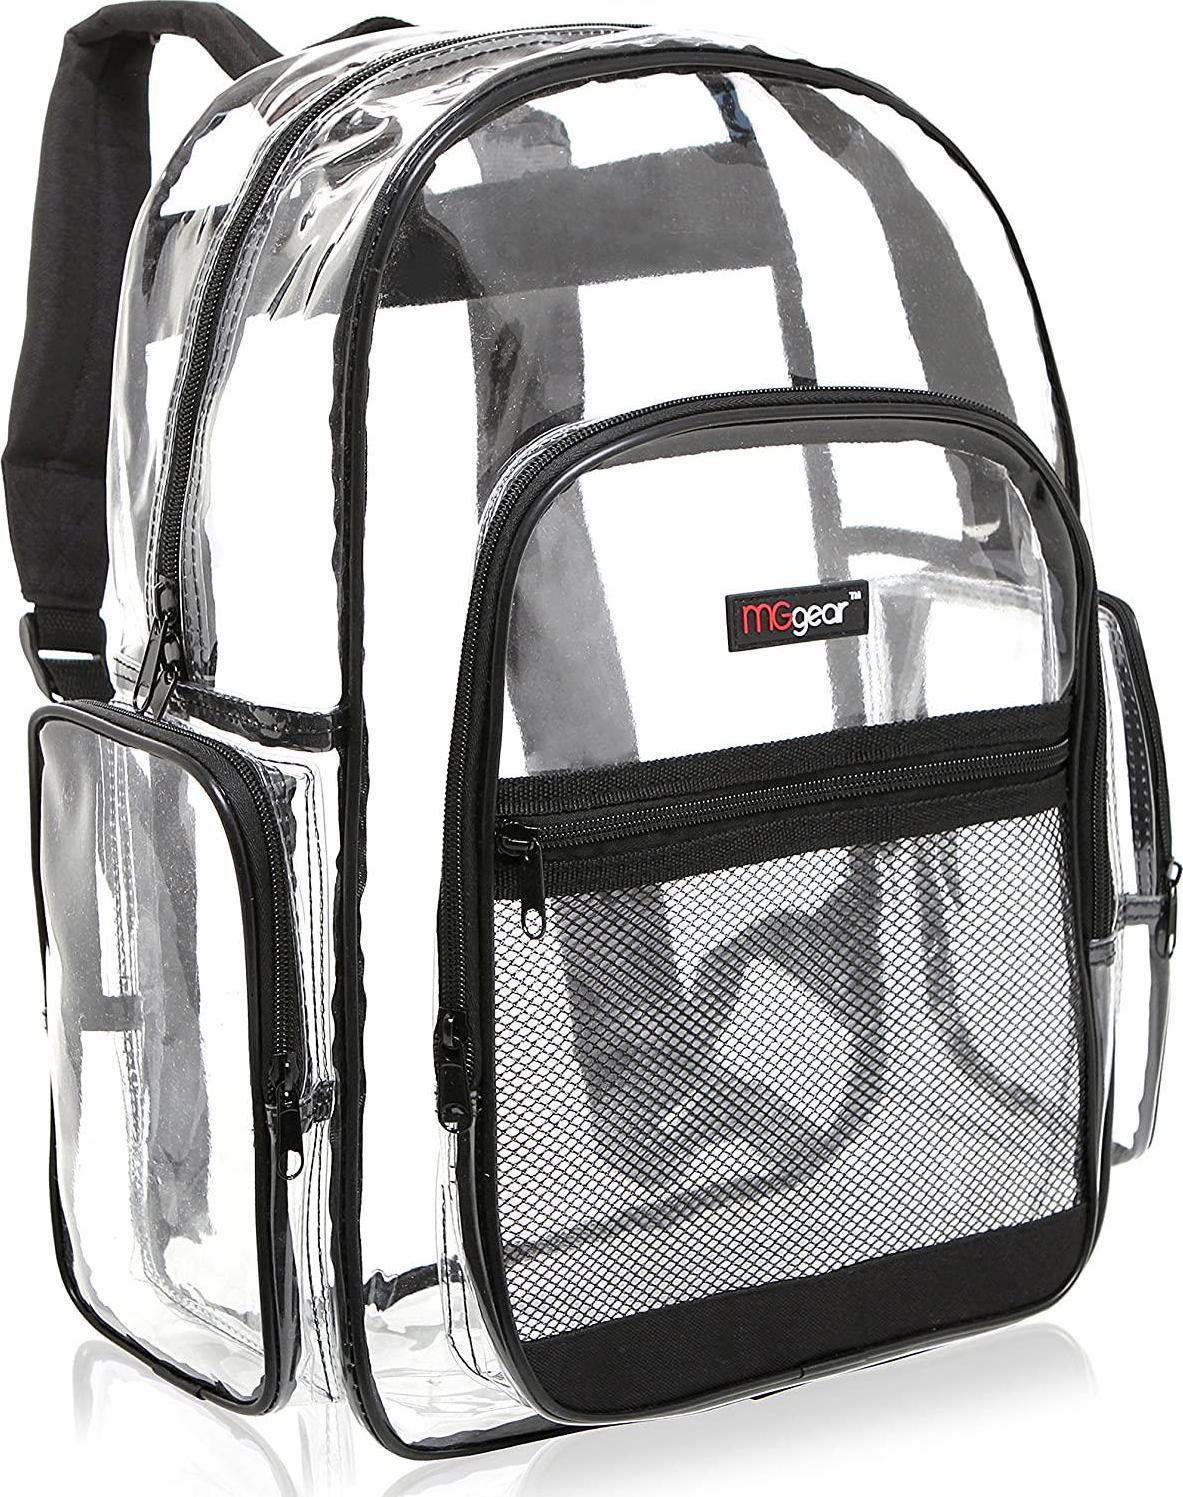 MGgear, MGgear Clear Transparent PVC School Backpack/Outdoor Backpack with Black Trim